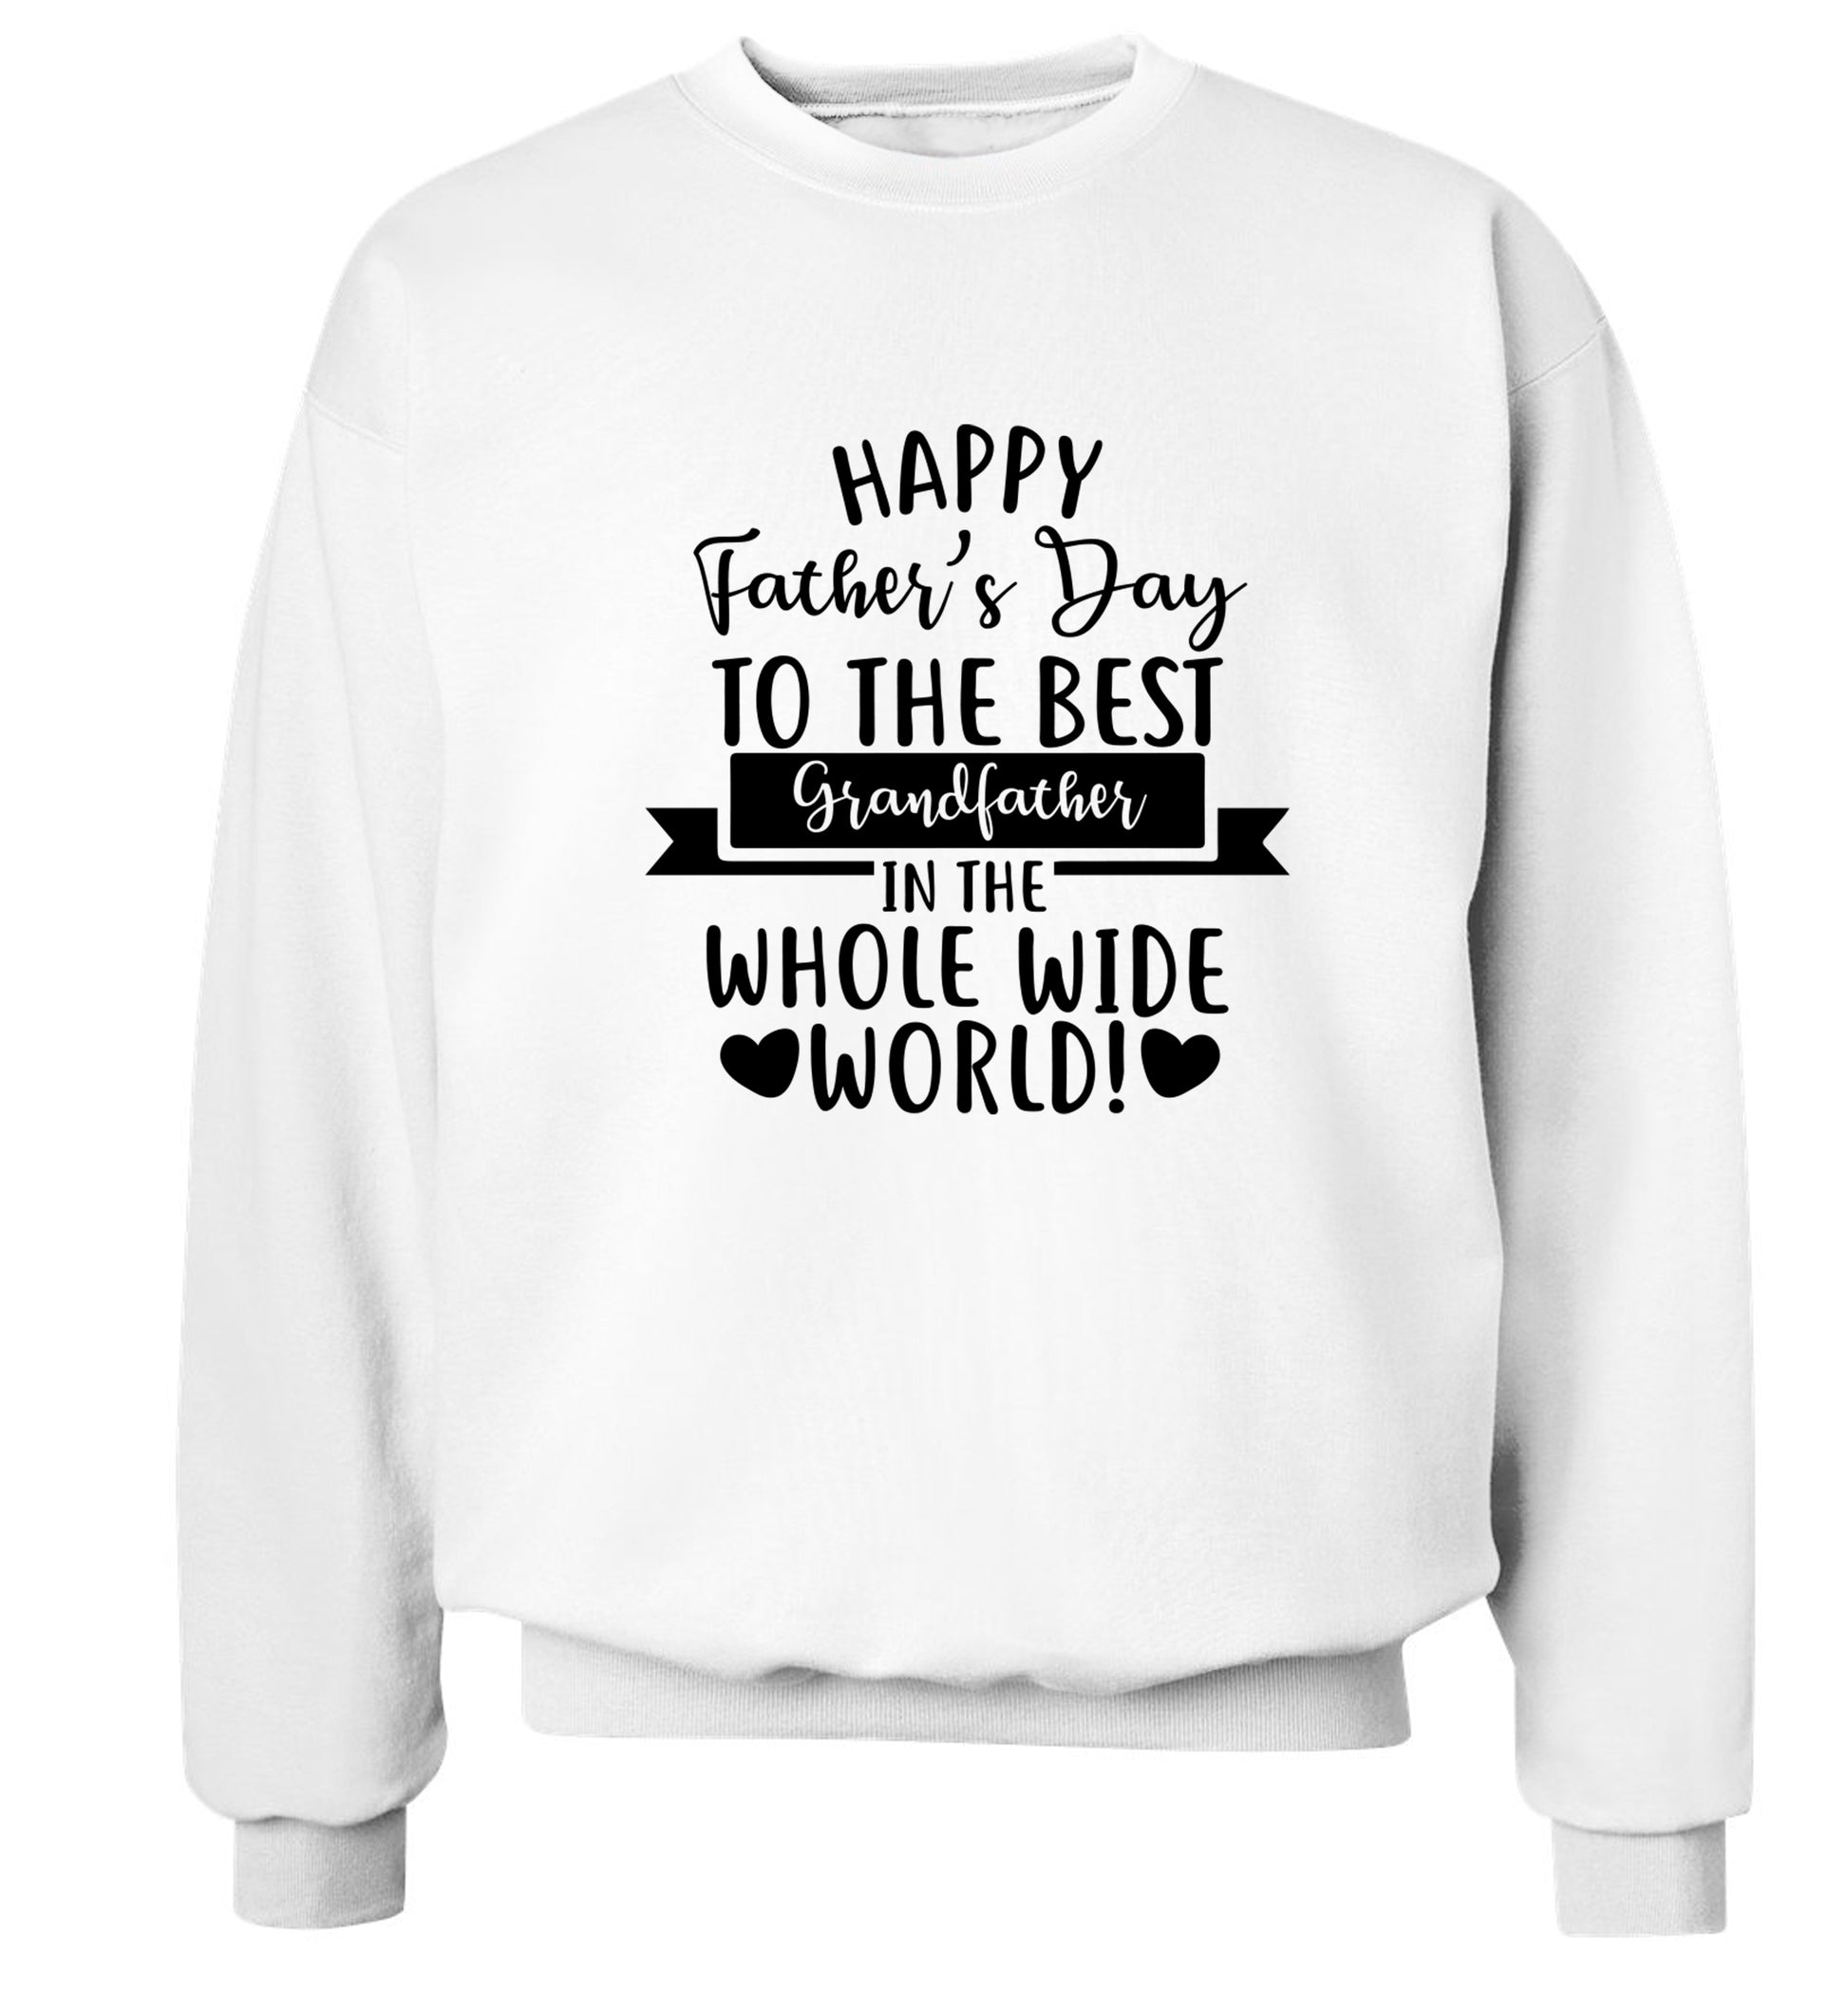 Happy Father's Day to the best grandfather in the world Adult's unisex white Sweater 2XL